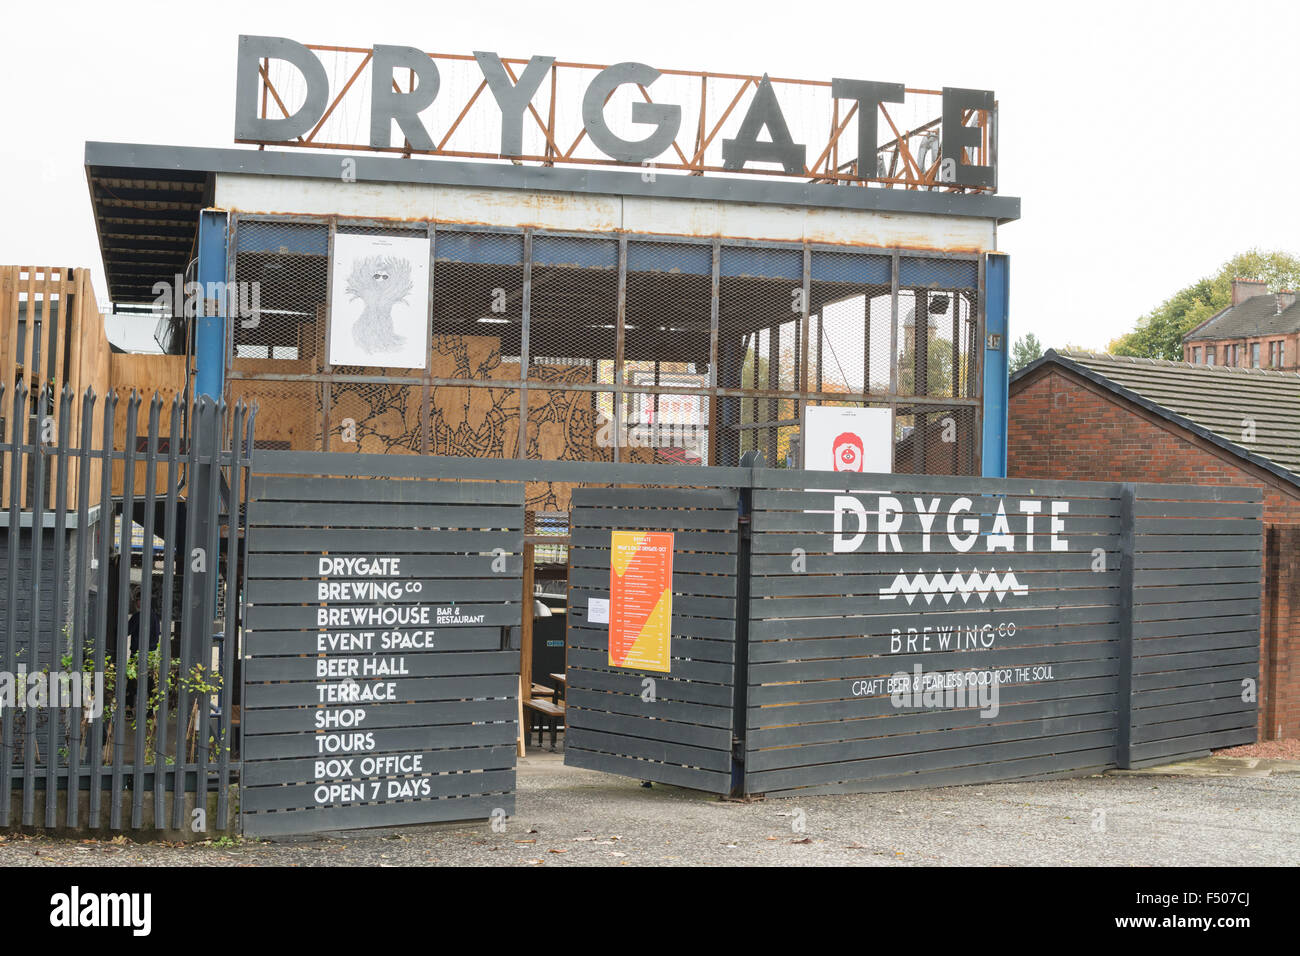 Drygate Brewing Co - craft beer real ale brewery in Glasgow, Scotland, UK Stock Photo